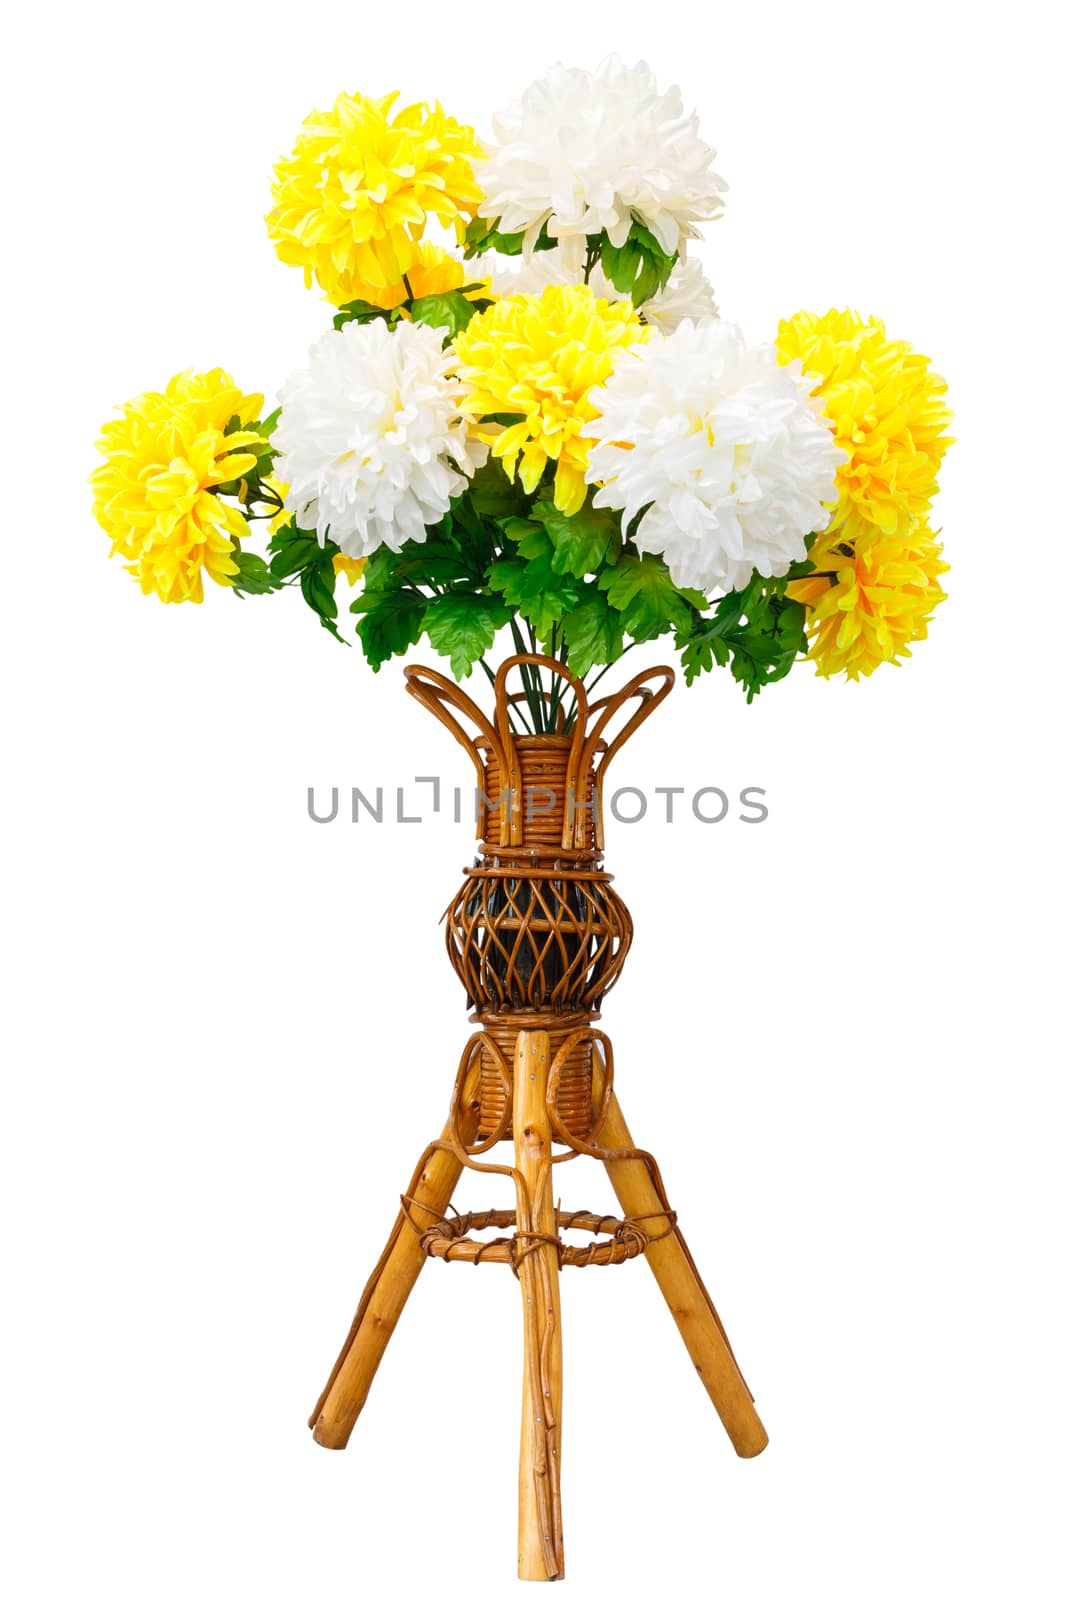 Artificial flowers and wicker wooden vase